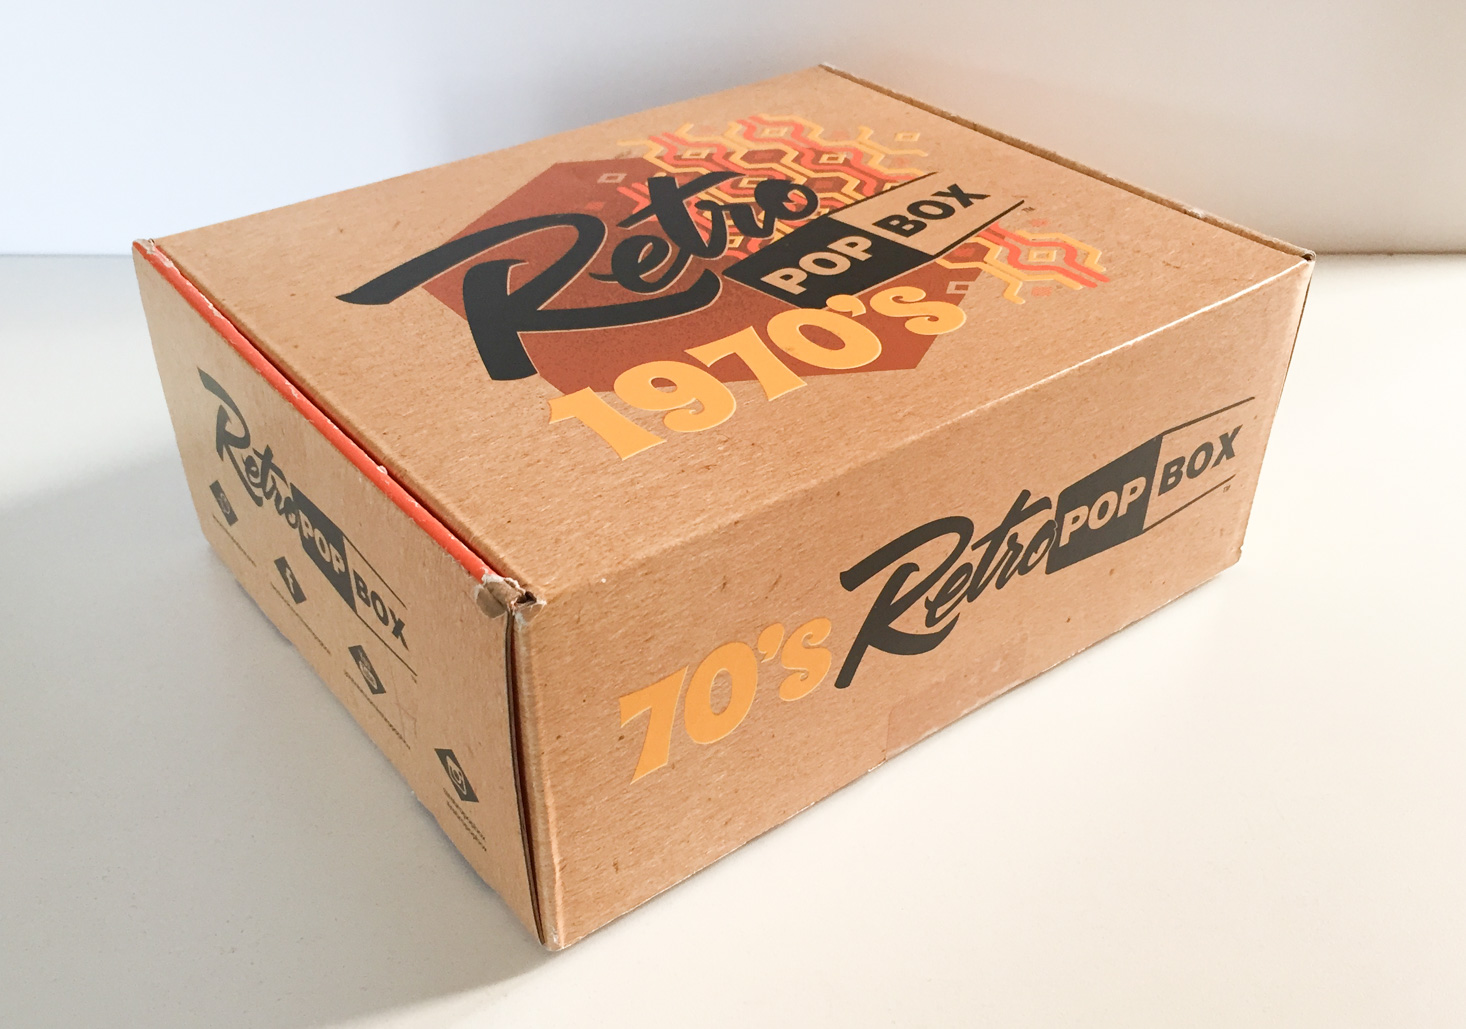 70s Retro Pop Box Subscription Review + Coupon- January 2017